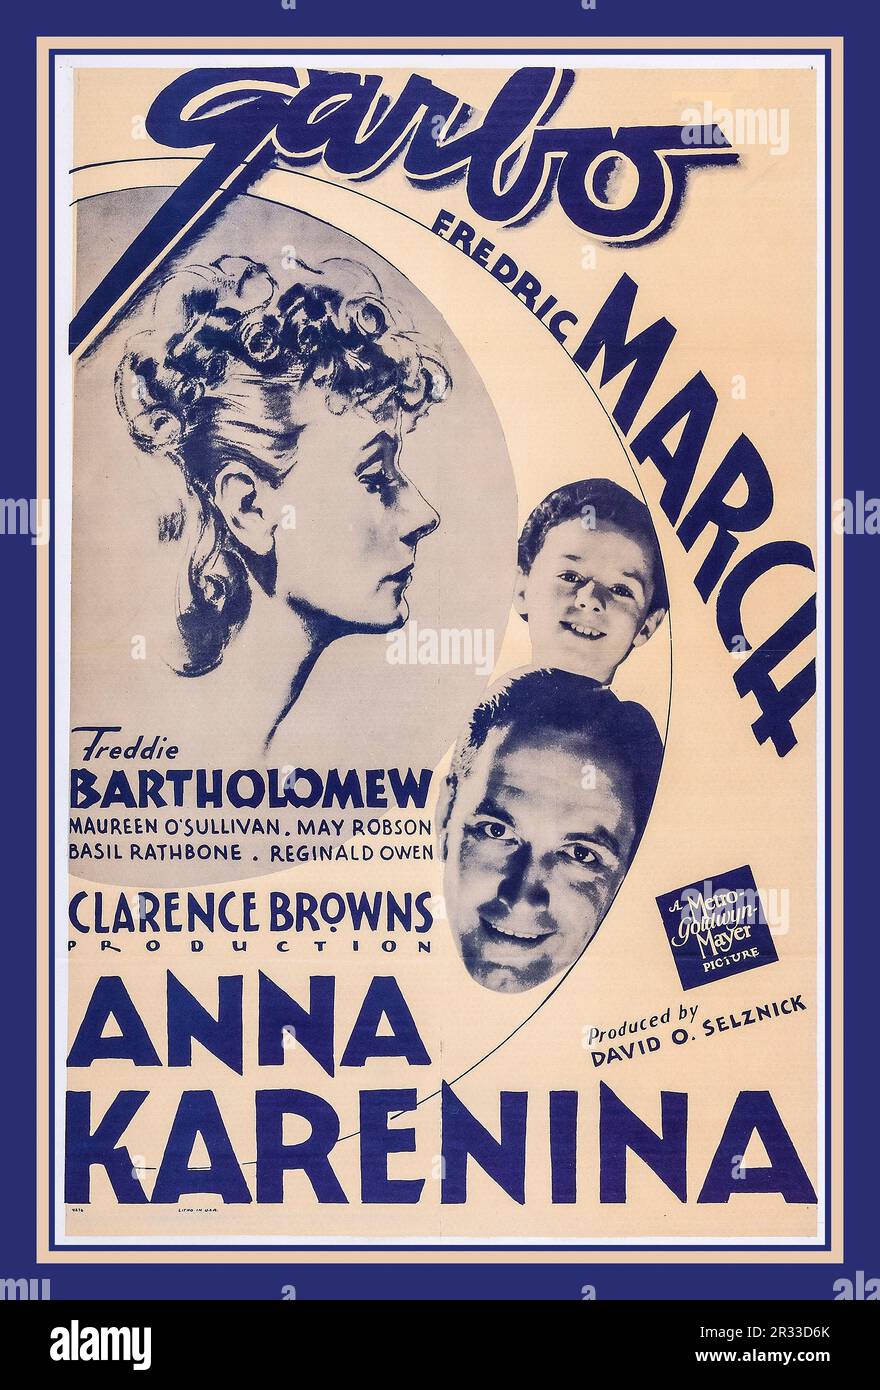 ANNA KARENINA Vintage Movie Film Poster for the 1935 film Anna Karenina. Film poster for 'Anna Karenina' a 1935 Metro-Goldwyn-Mayer film adaptation of the 1877 novel Anna Karenina by Leo Tolstoy and directed by Clarence Brown. The film stars Greta Garbo, Fredric March, Basil Rathbone, and Maureen O'Sullivan Stock Photo